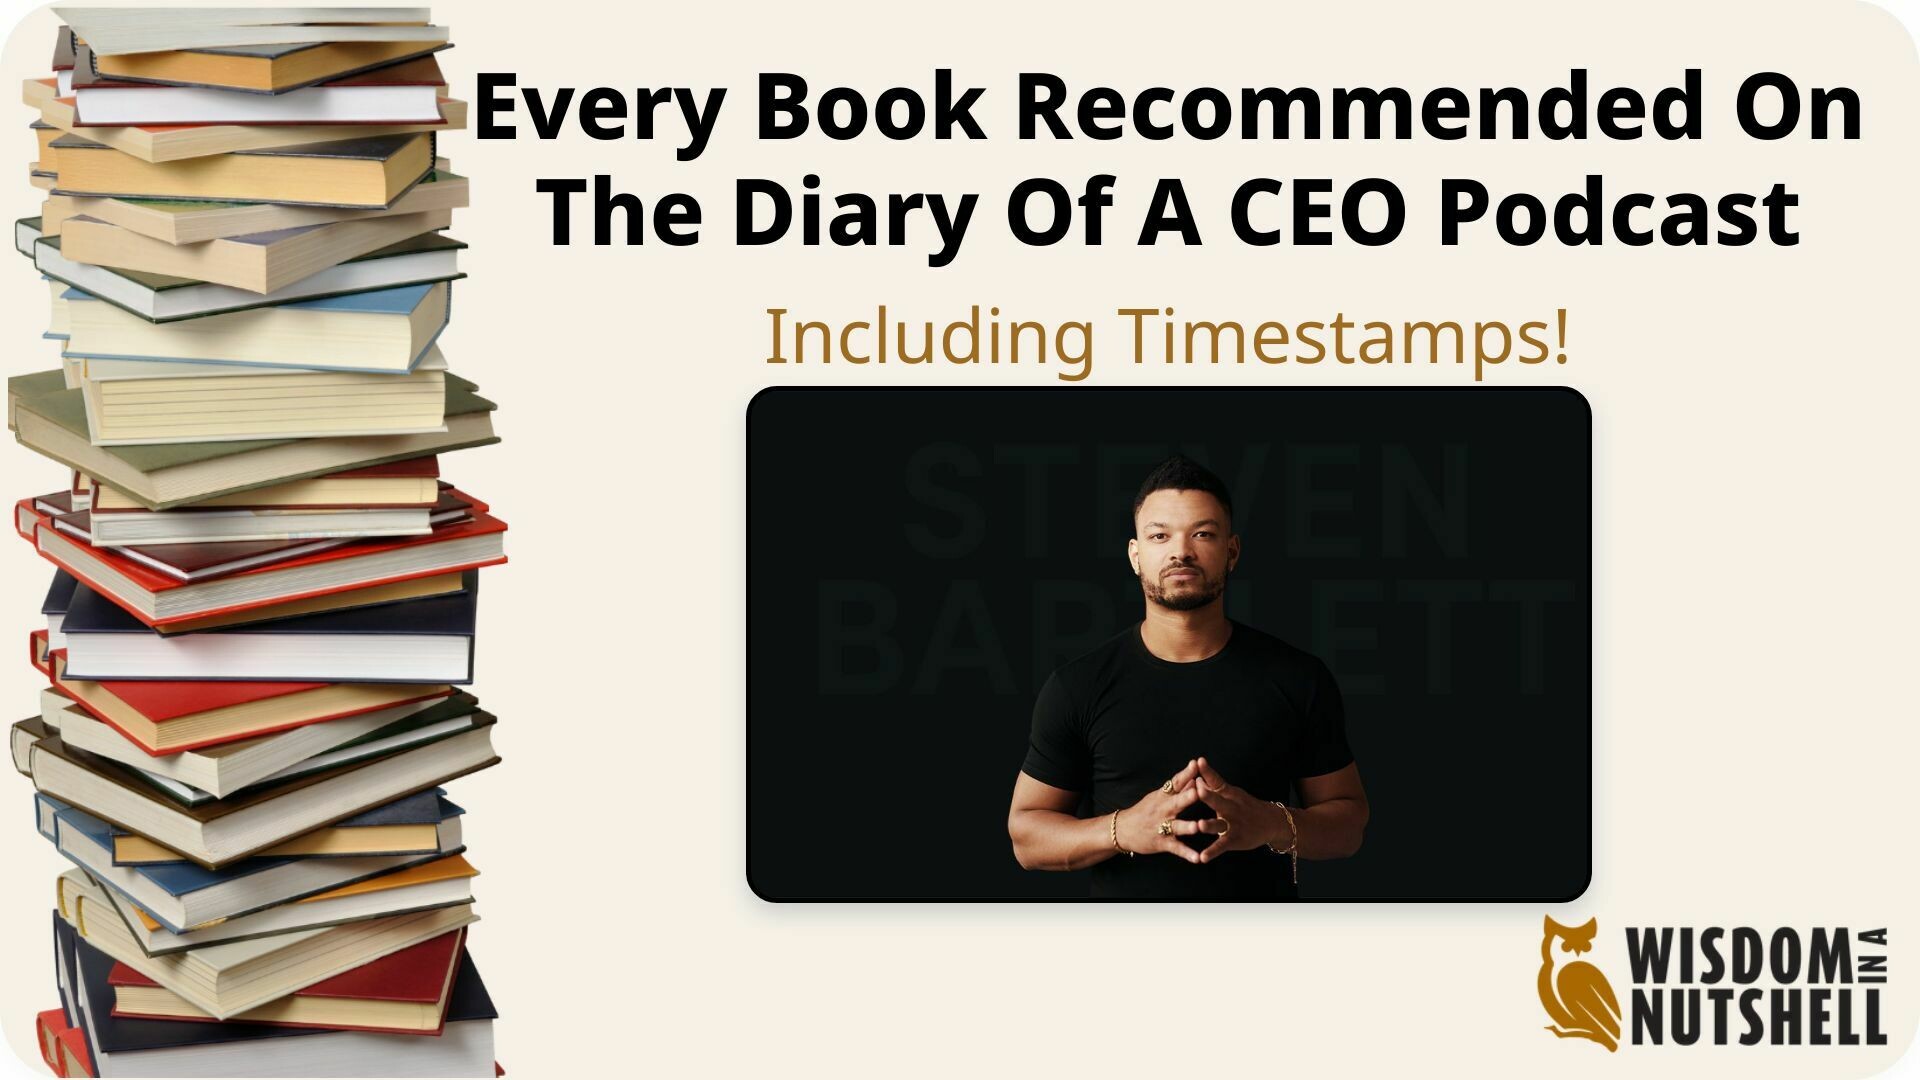 Every Book Recommended on the The Diary Of A CEO Podcast